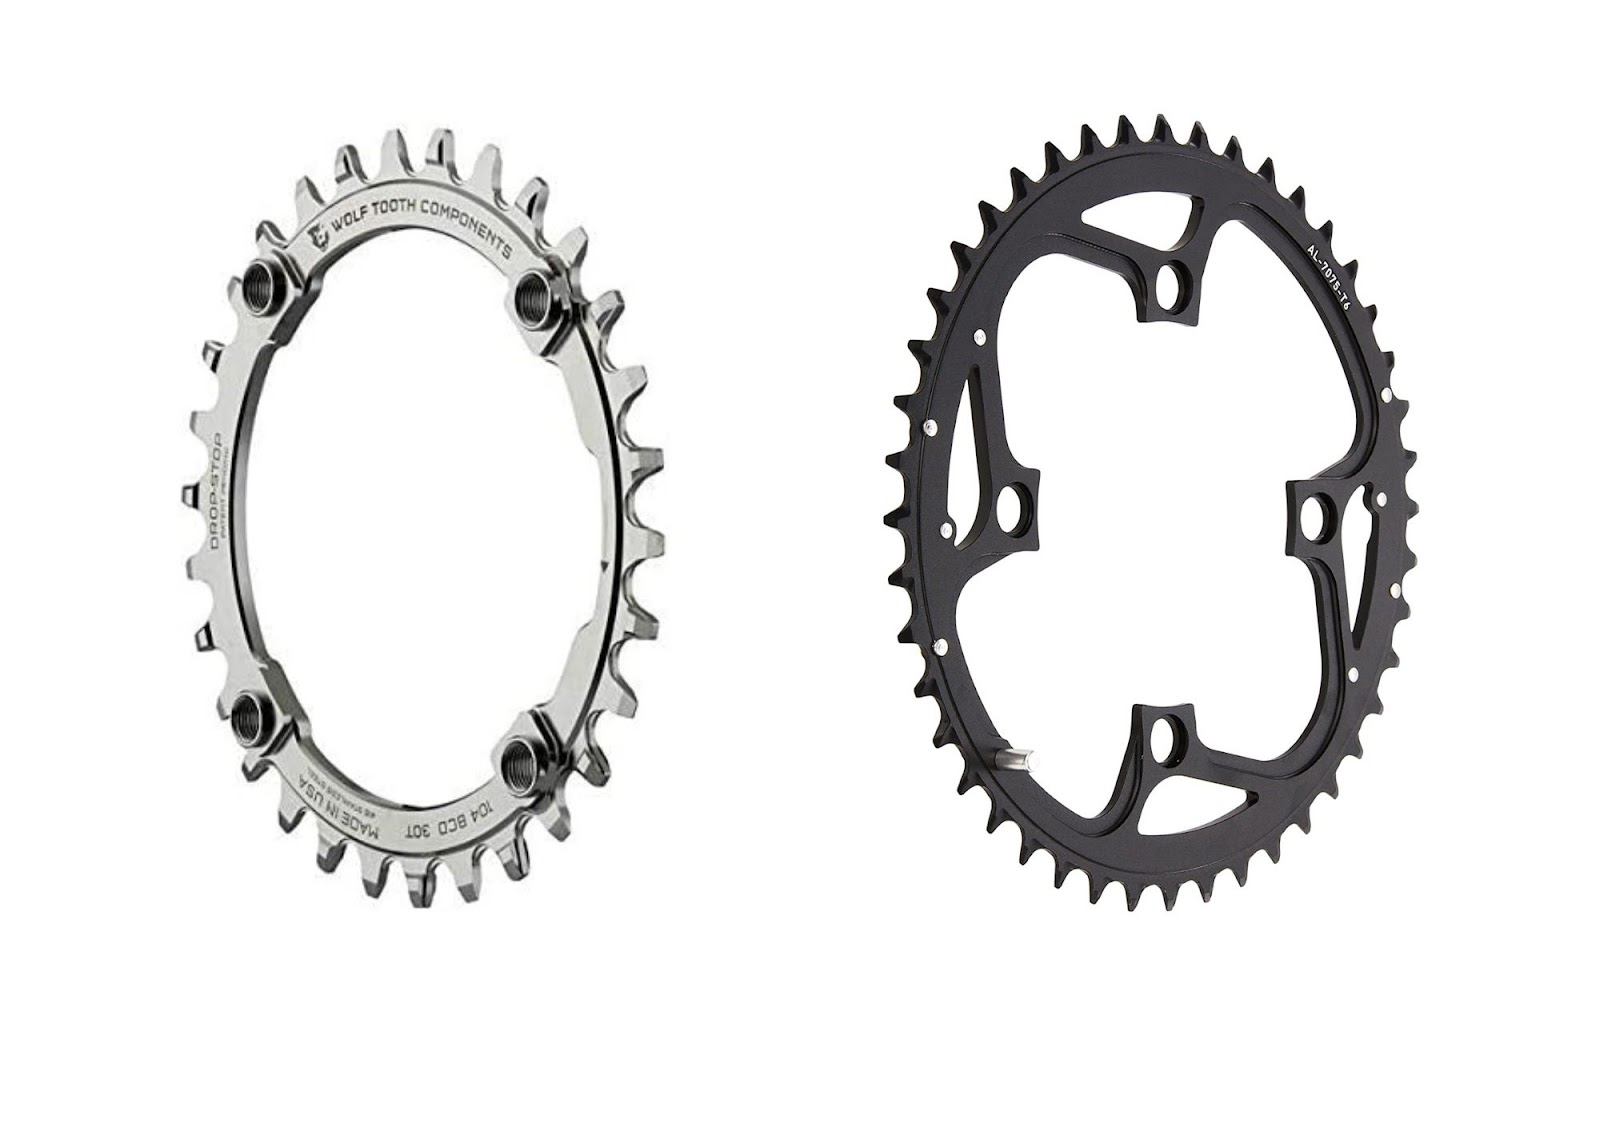 Steel and aluminum mountain bike front chainrings both have pros and cons.